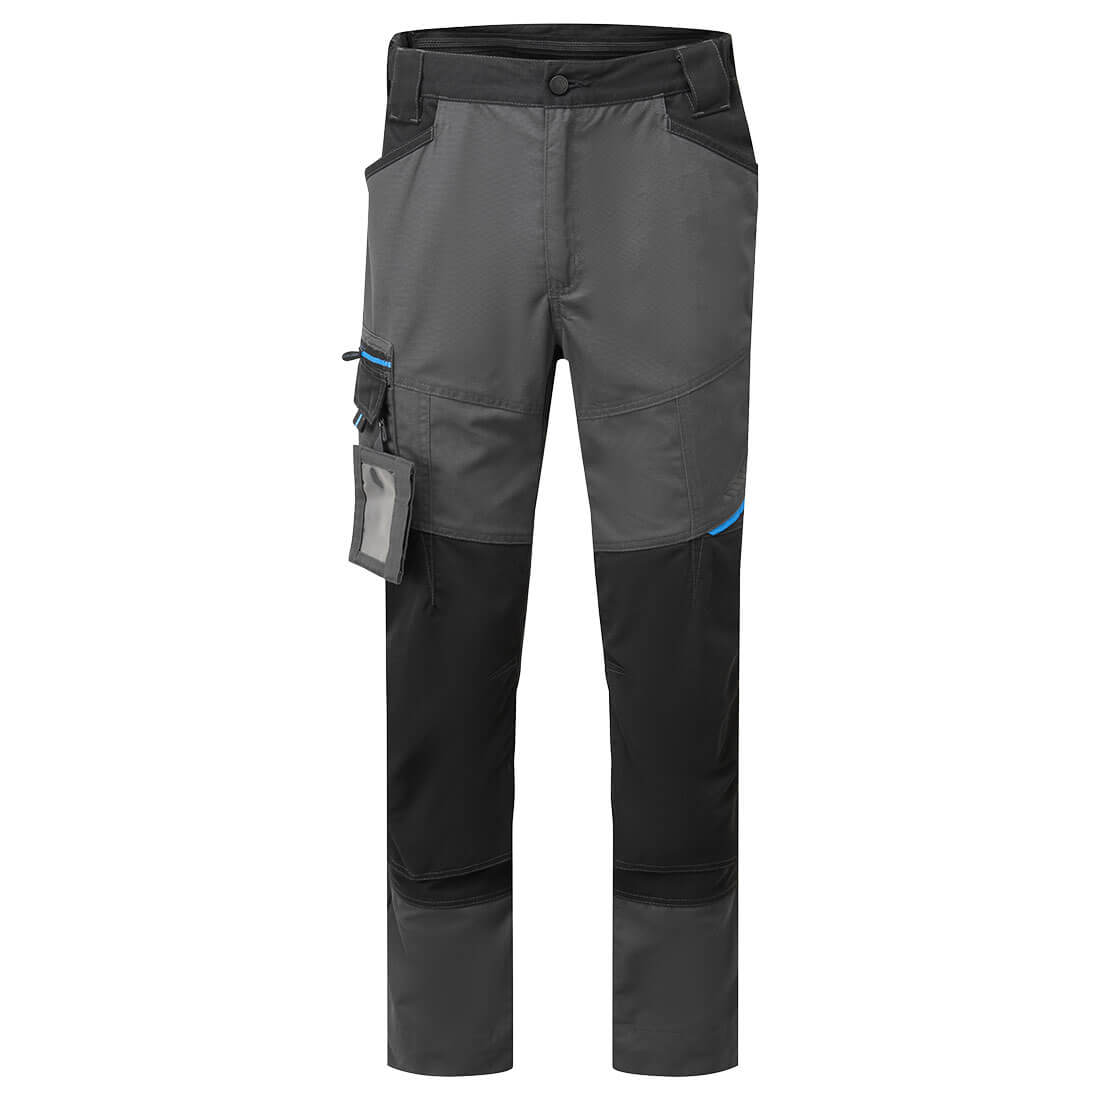 Portwest WX3 Slim Fit Work Trousers